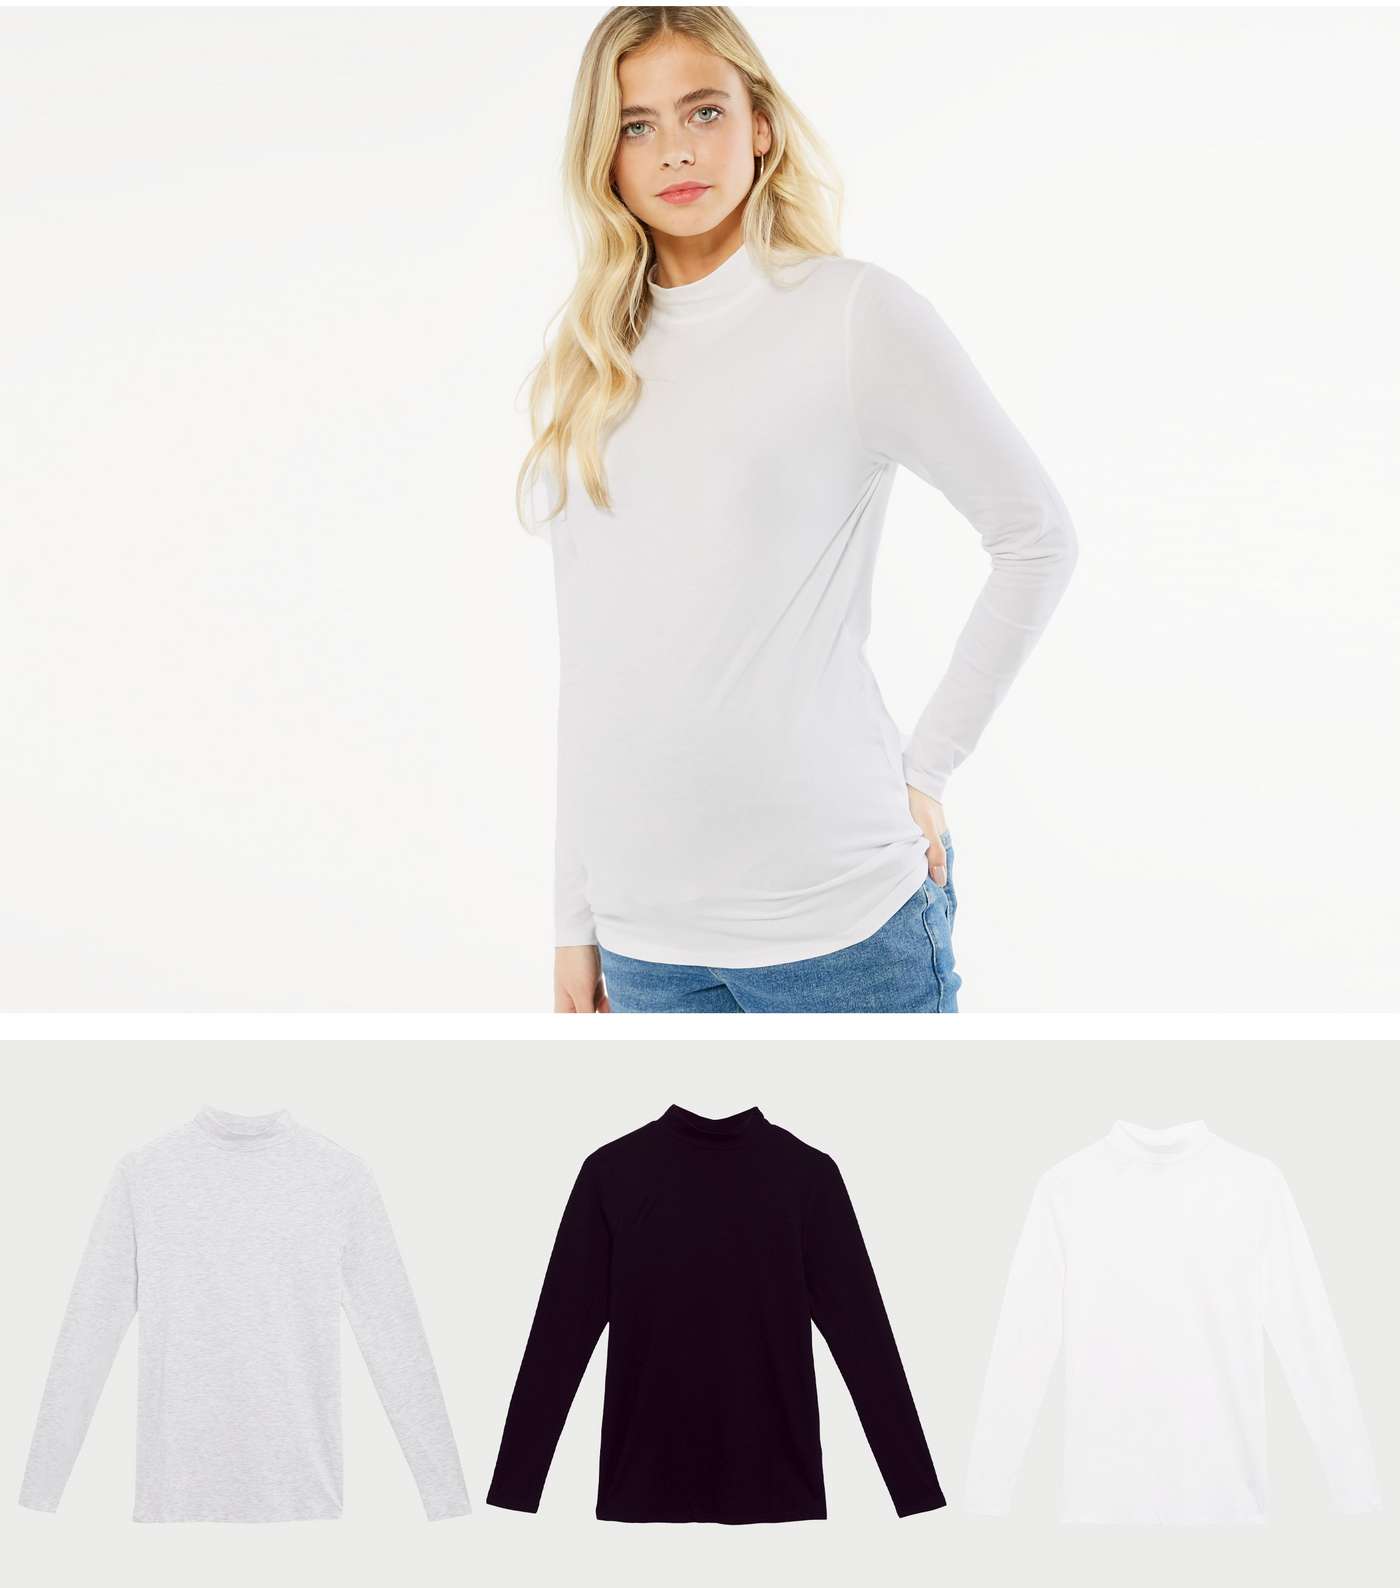 Maternity 3 Pack Black White and Grey High Neck Tops